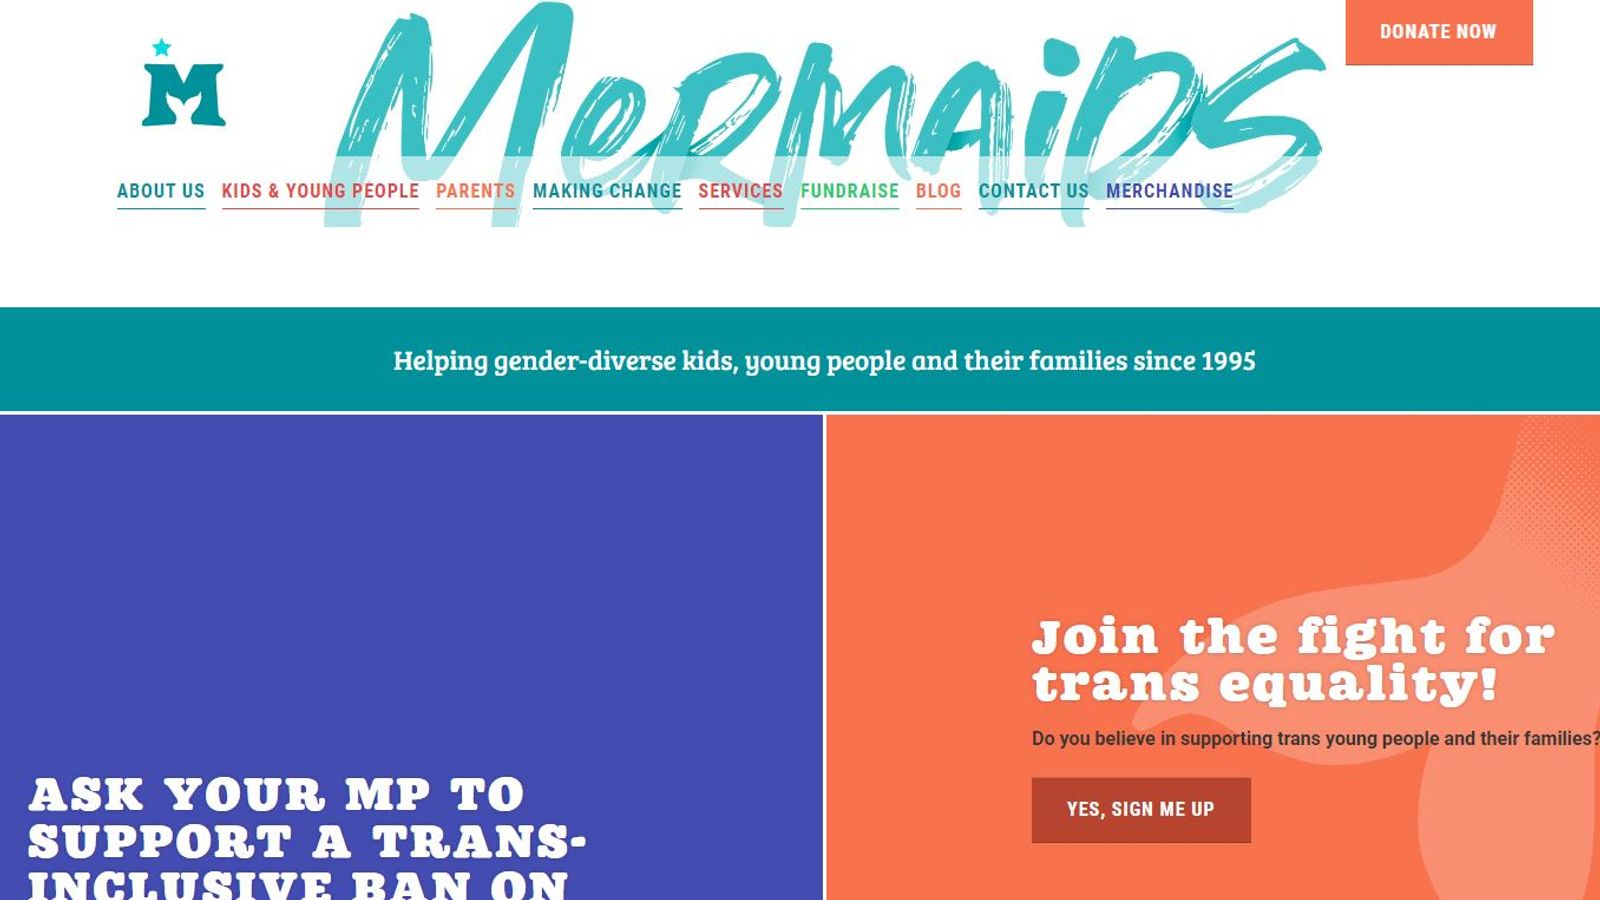 Trans charity Mermaids investigated after 'offering chest binders without  parental consent', UK News